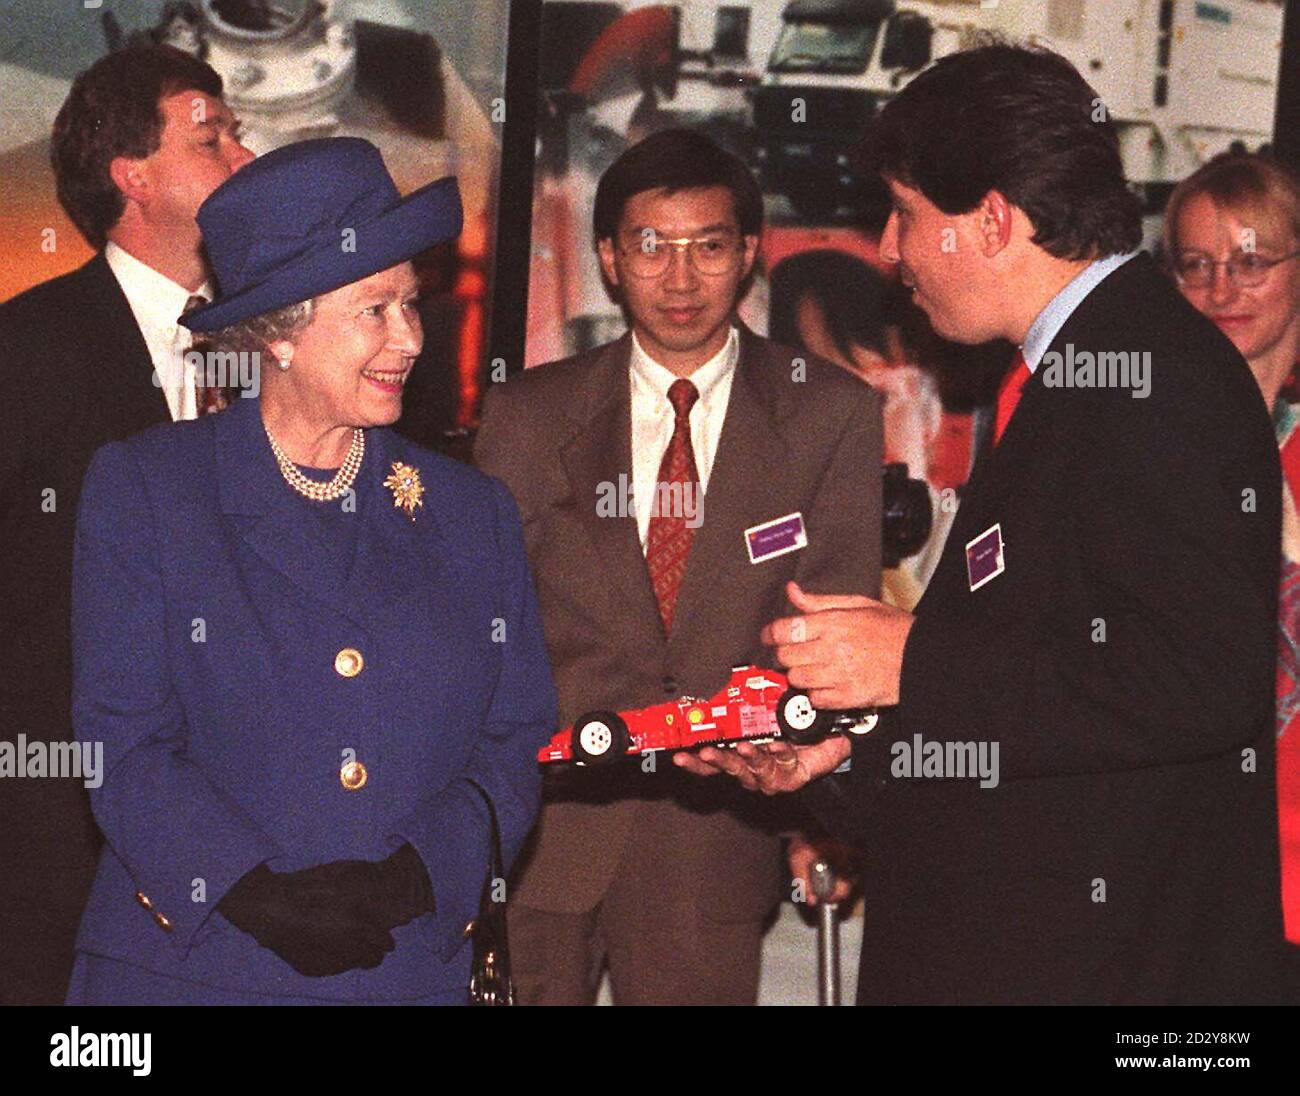 Britain's Queen Elizabeth II is shown a model Ferrari Racing car during visit to the Shell Centre in London, today (Tuesday). Headquarters of the Shell Oil and exploration company, were she unveiled a sculpture marking the centenary of the founding of the company .AFP/WPA ROTA-PAUL VICENTE Stock Photo